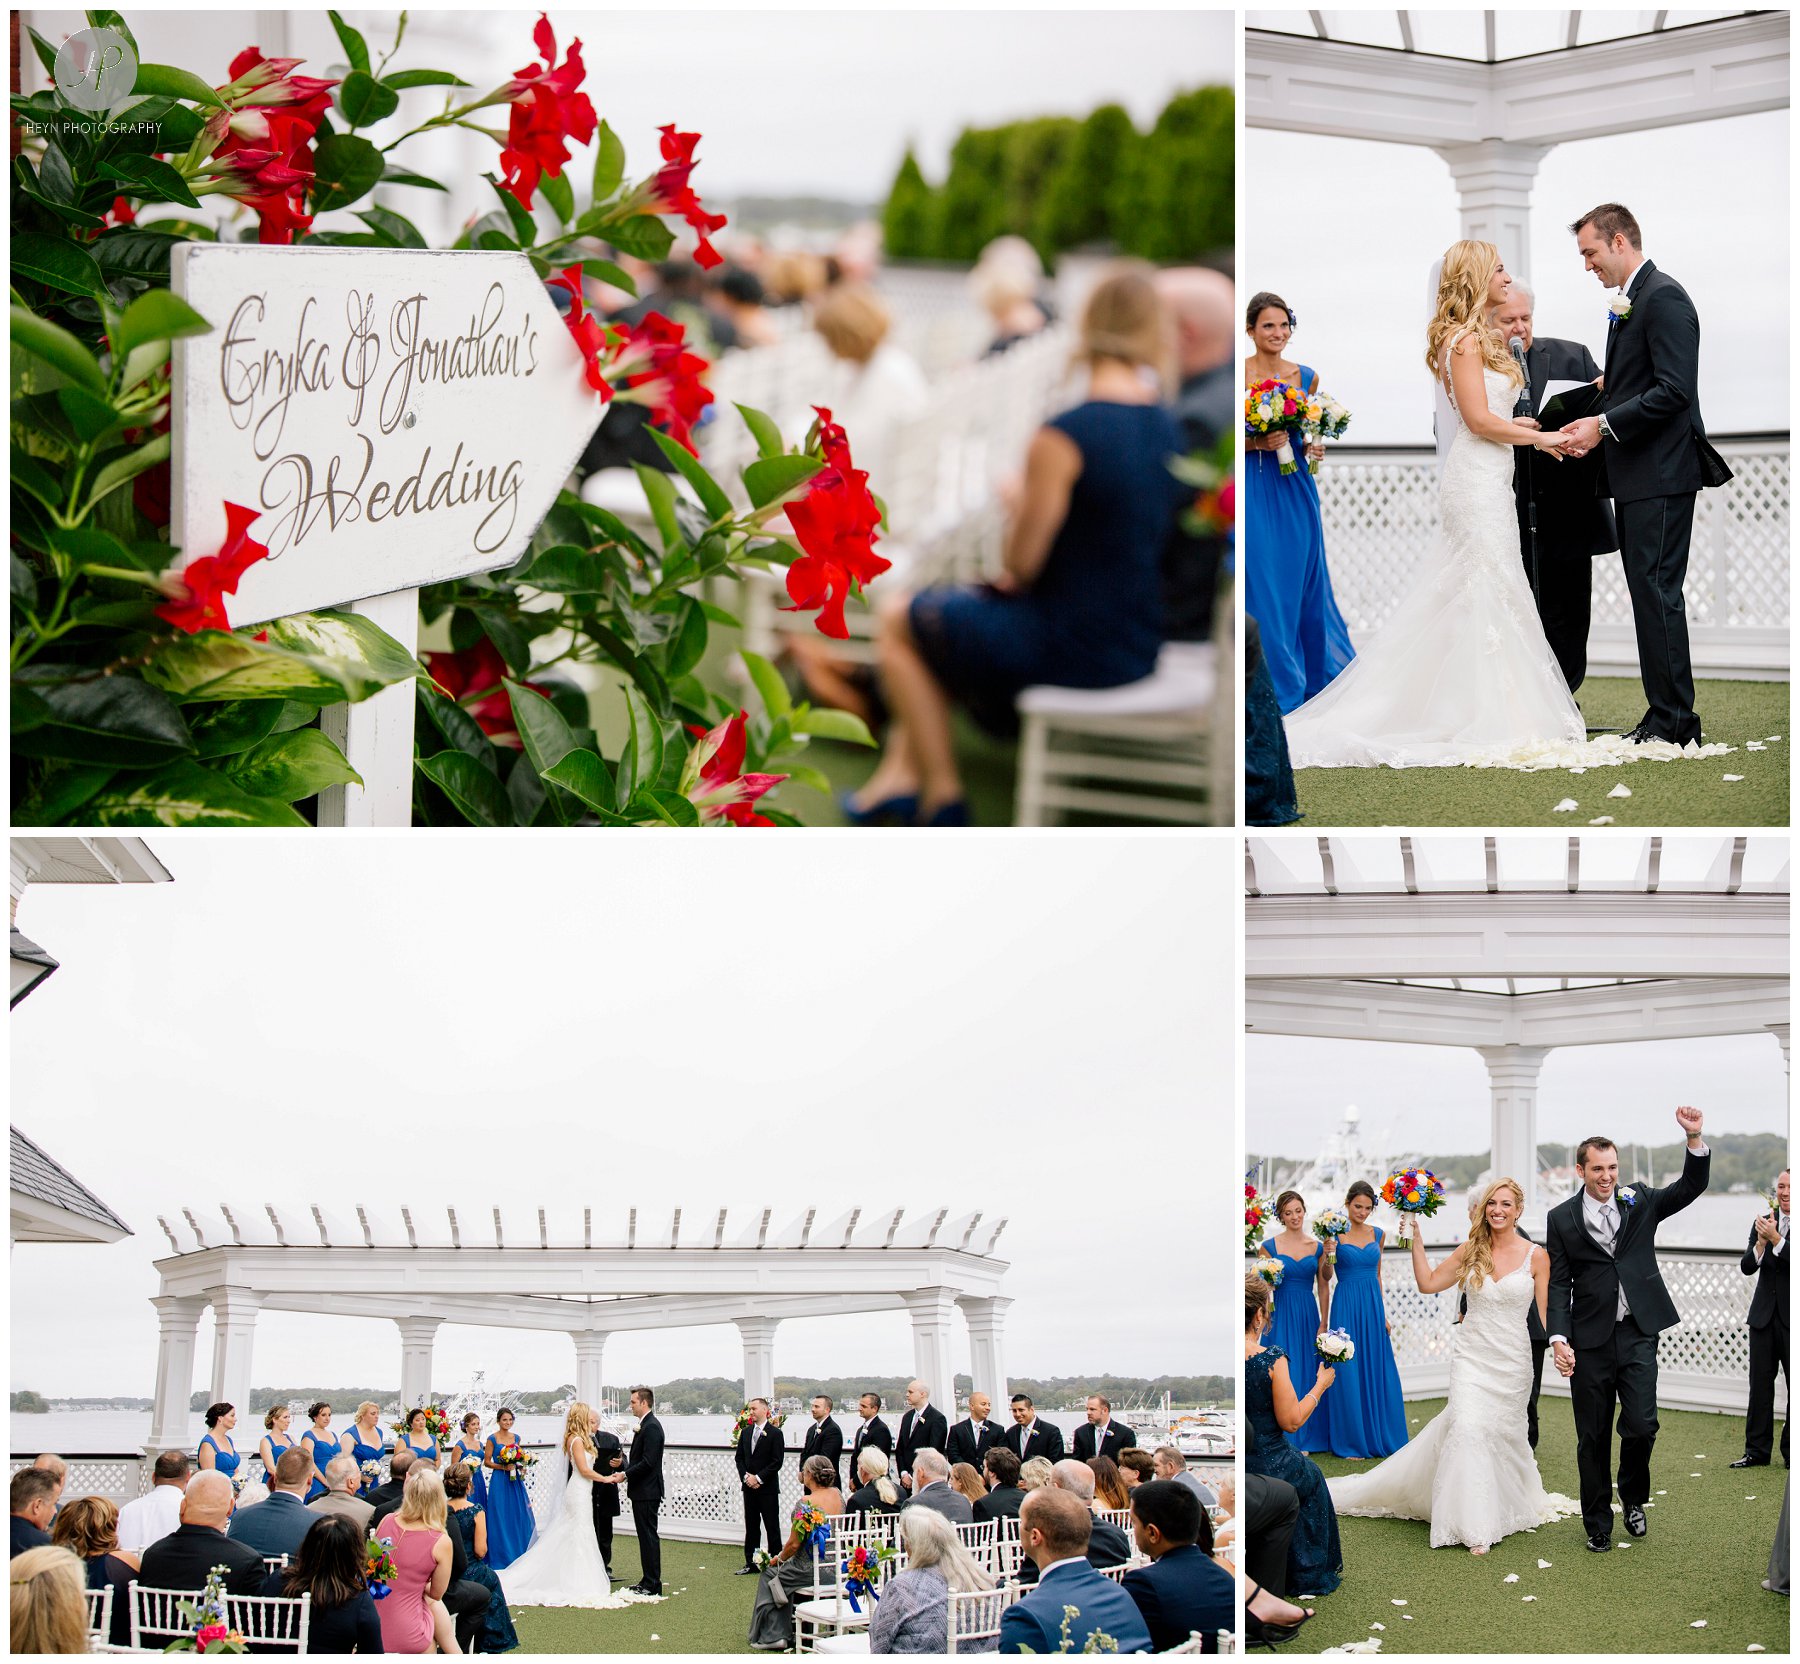  outside ceremony at clarks landing yacht club wedding in new jersey